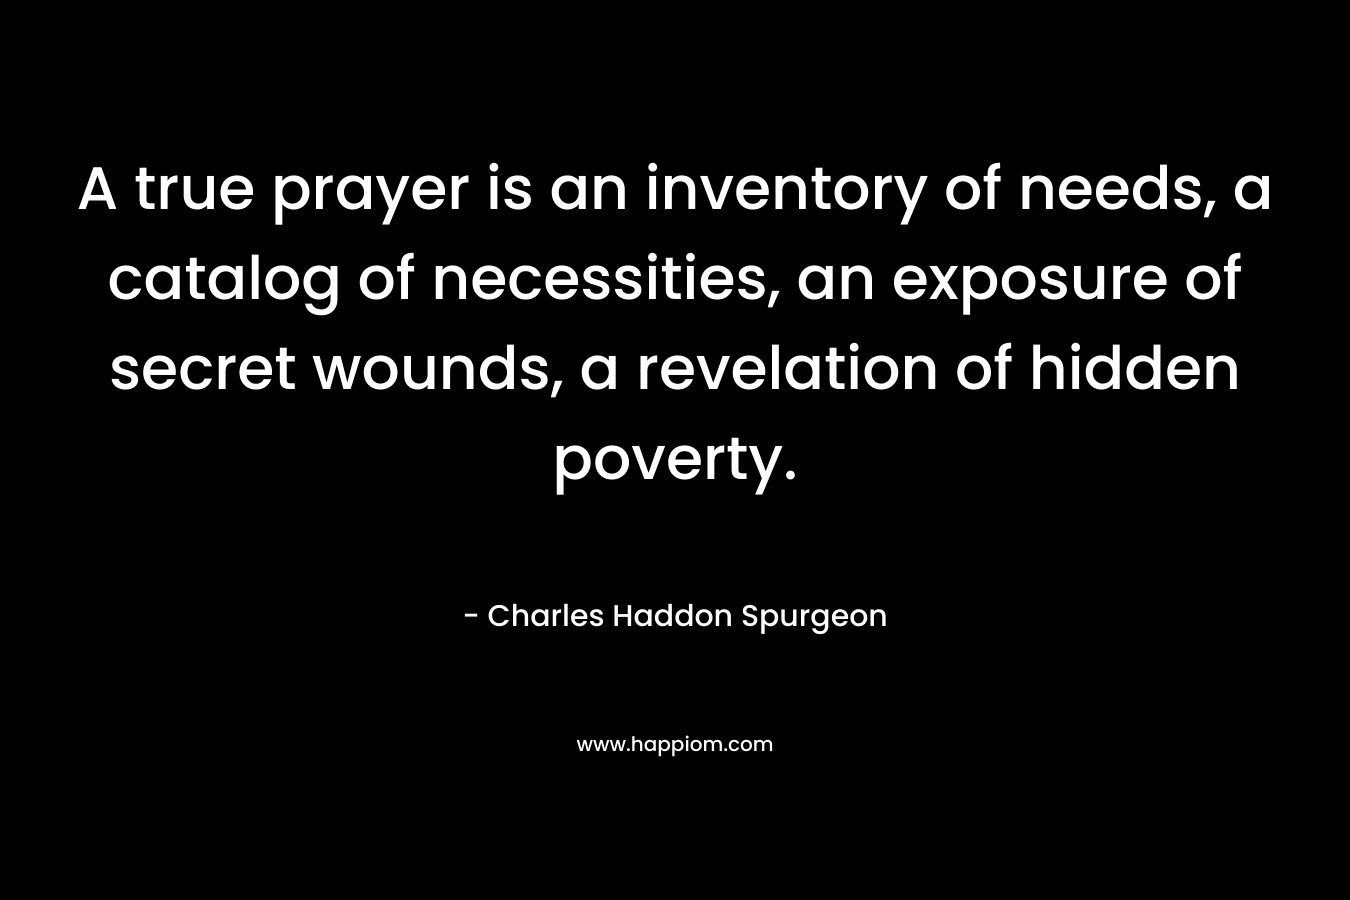 A true prayer is an inventory of needs, a catalog of necessities, an exposure of secret wounds, a revelation of hidden poverty. – Charles Haddon Spurgeon